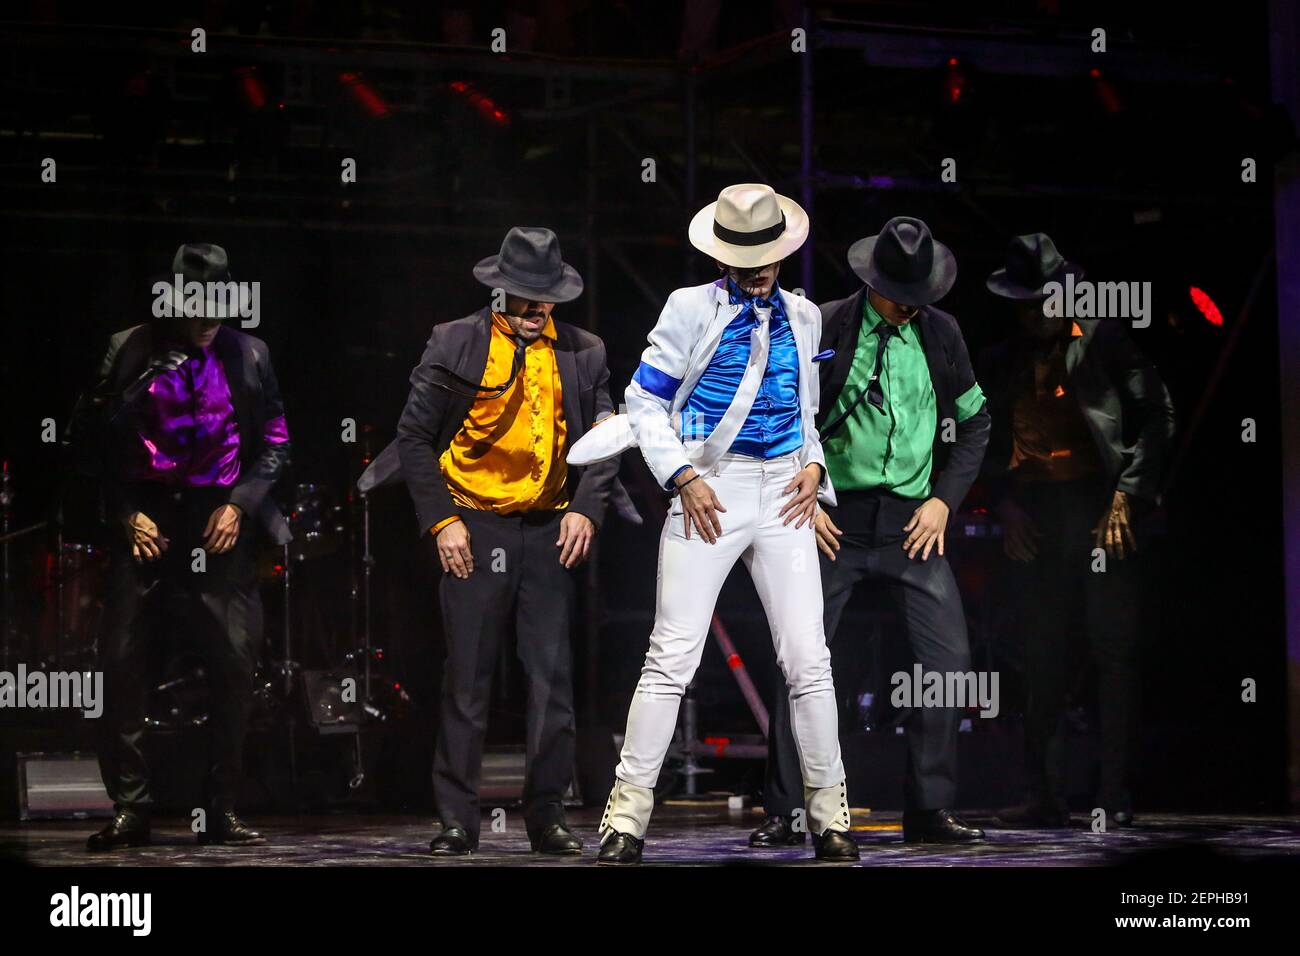 Forever: "The best show about the King of Pop", a musical show with the  greatest hits of Michael Jackson held in Santa Cruz de Tenerife, Spain on  December 27, 2019. Approved by